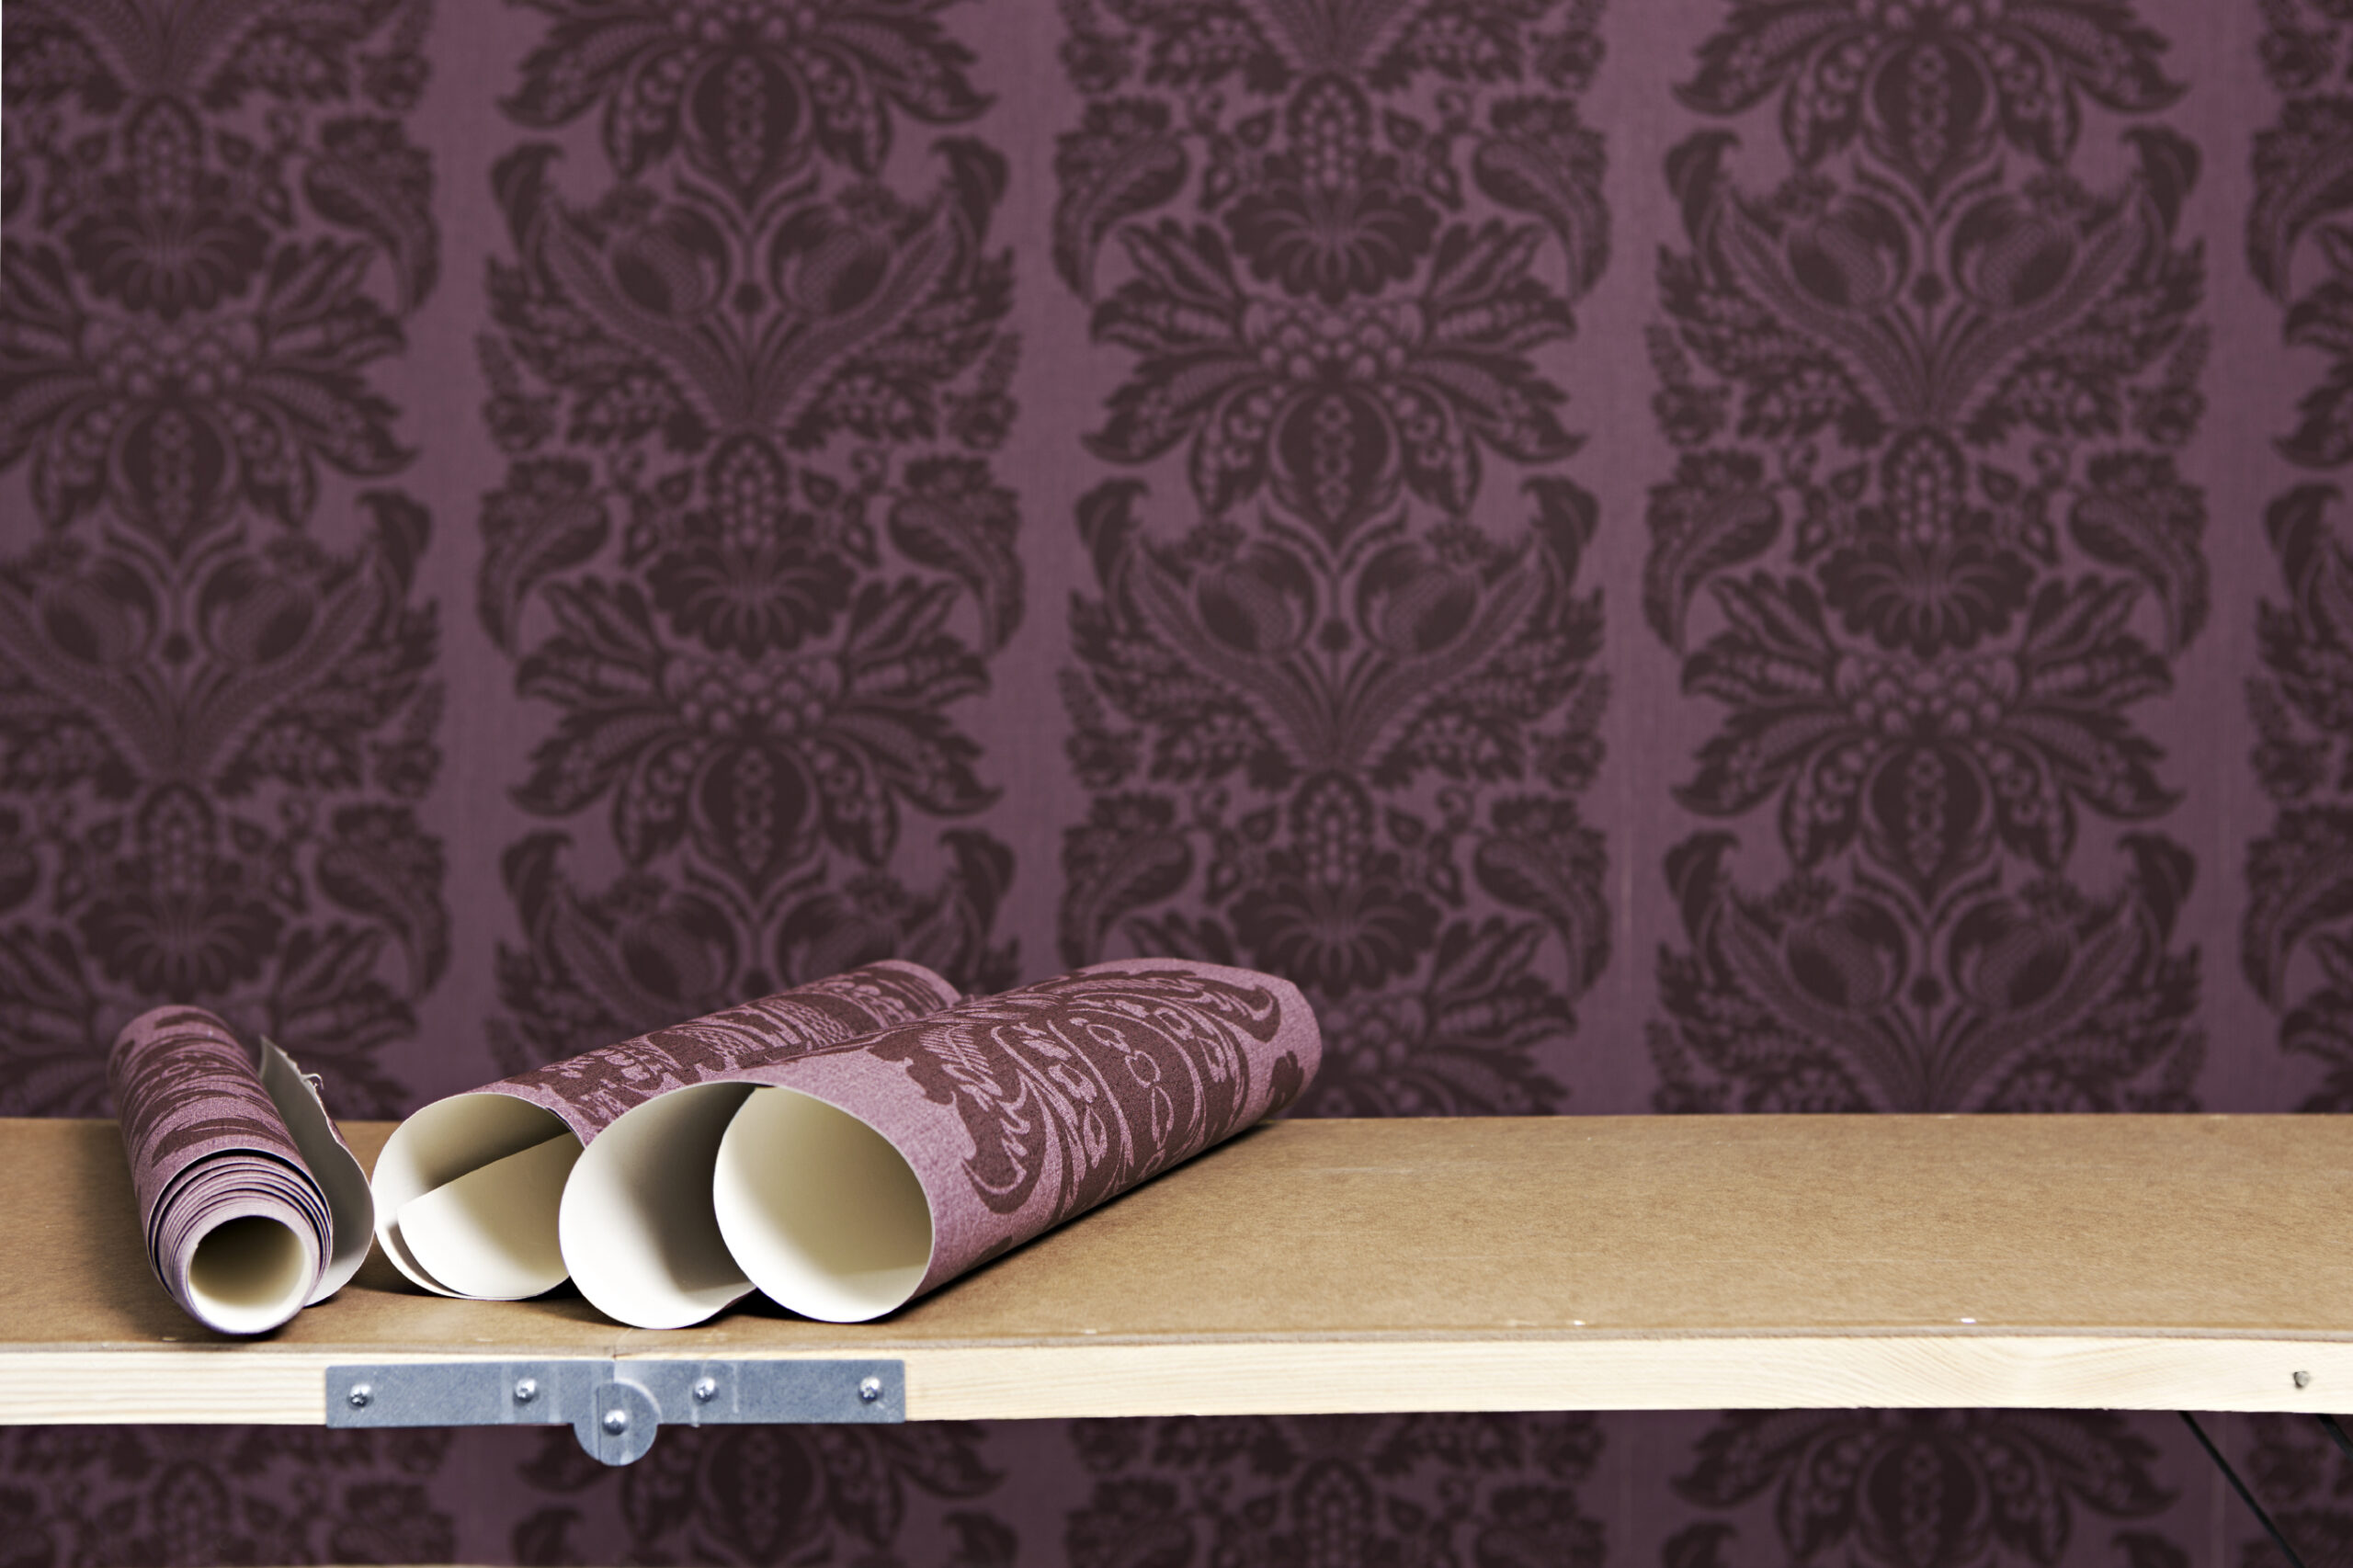 Rolls of wallpaper for interior decoration of a room. Wallpaper or paint options